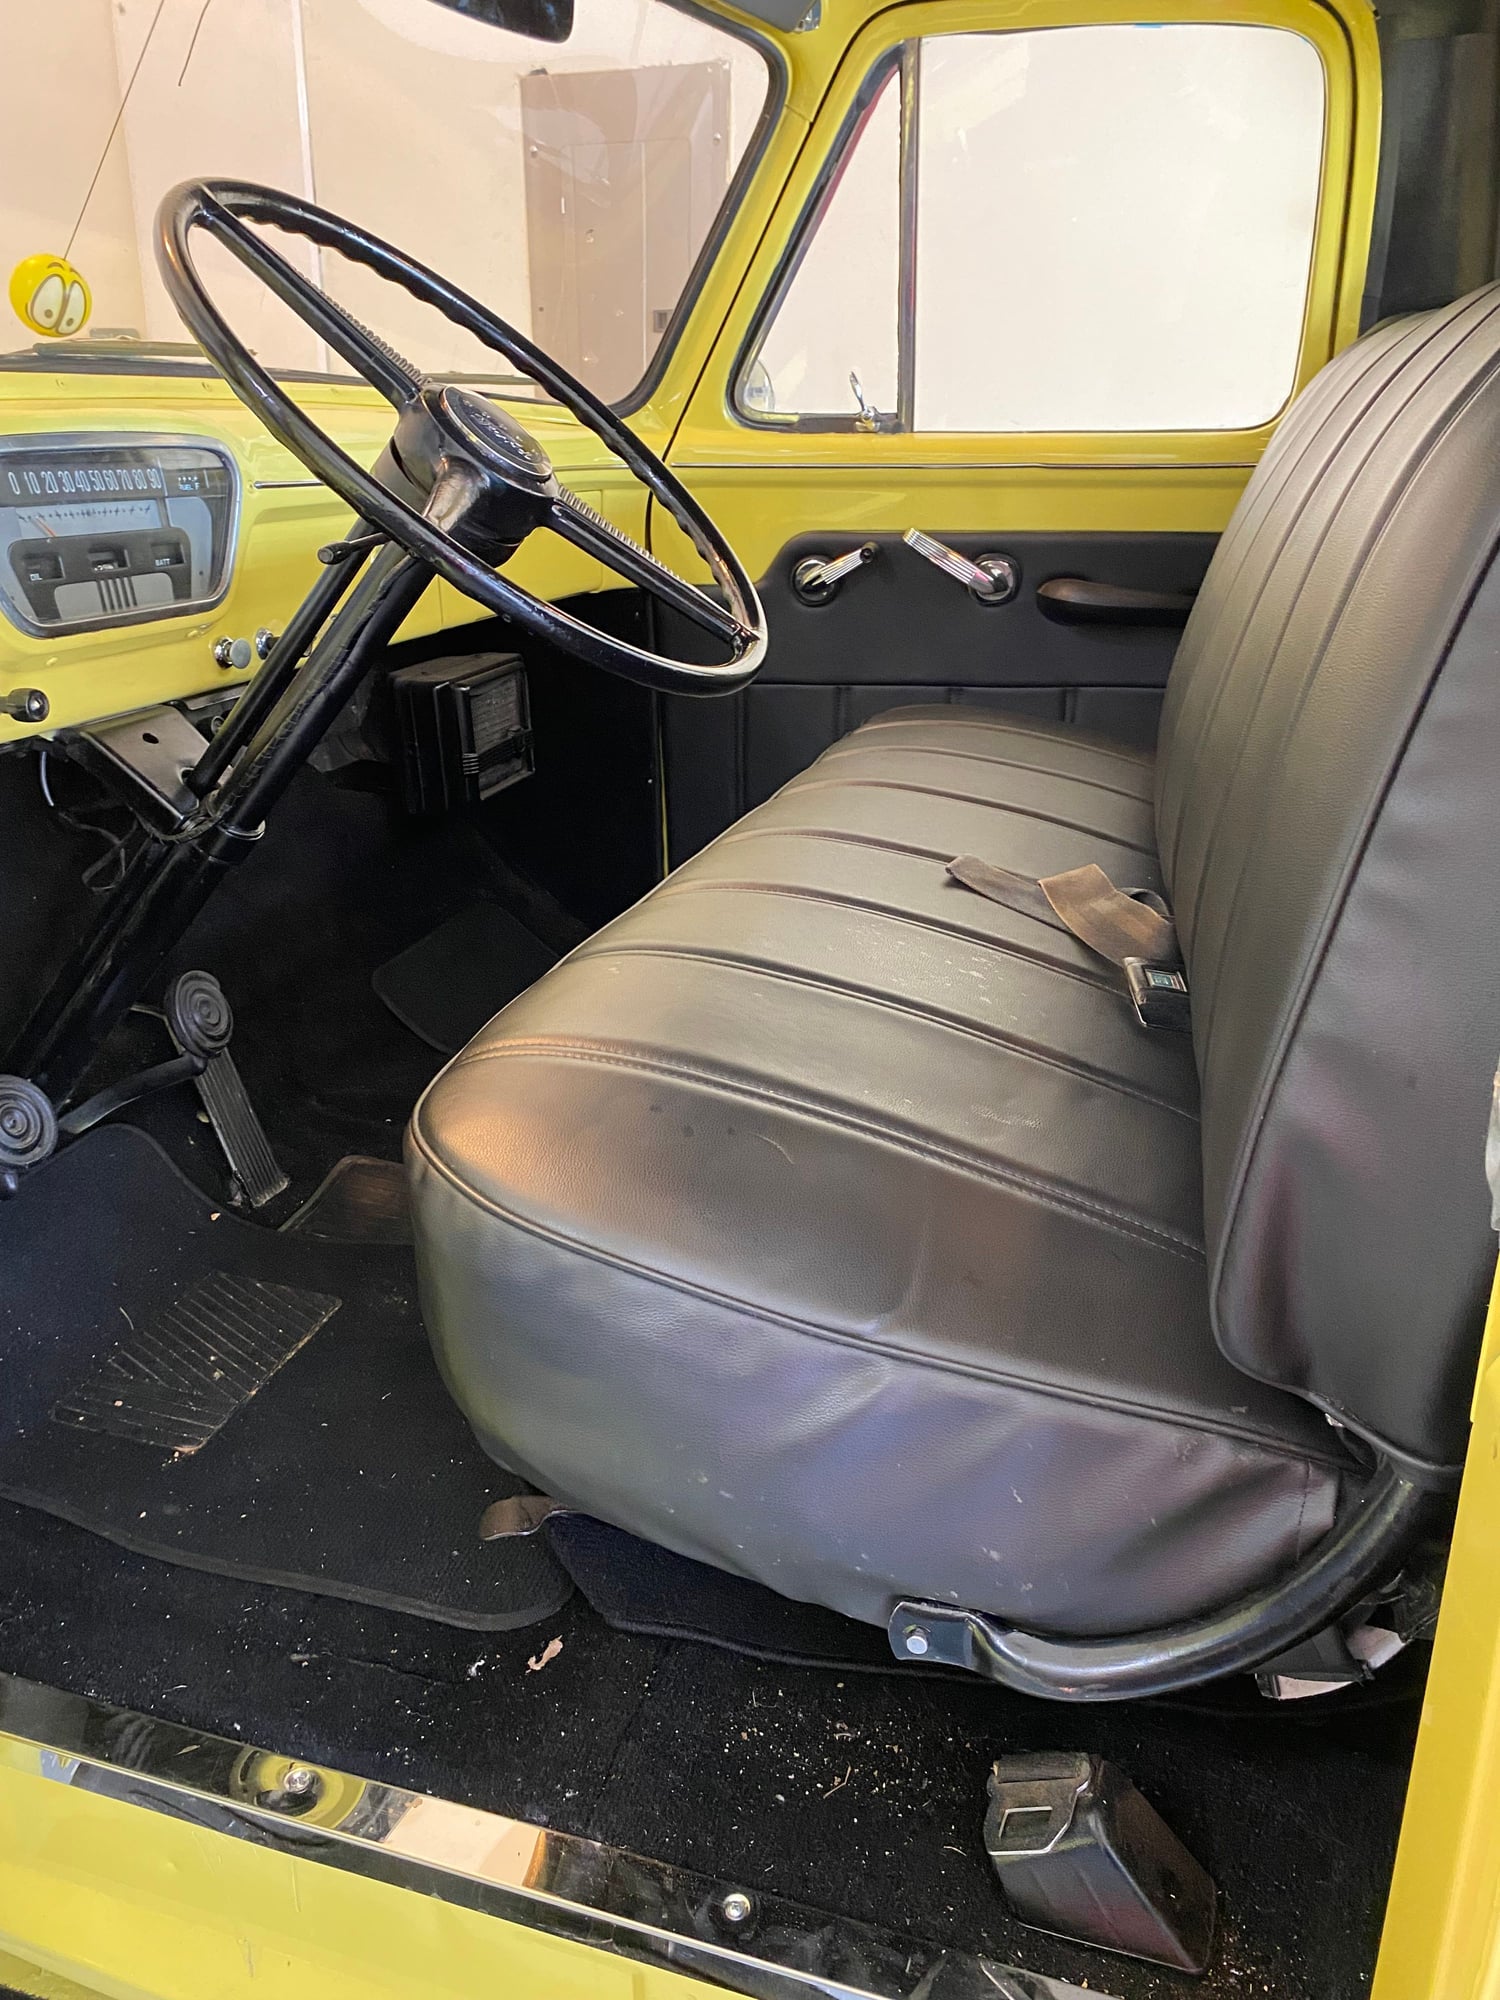 1955 Ford F-100 - 1955 F100 - Used - VIN F10CV5U10100 - 8 cyl - 2WD - Manual - Truck - Yellow - Forked River, NJ 08731, United States